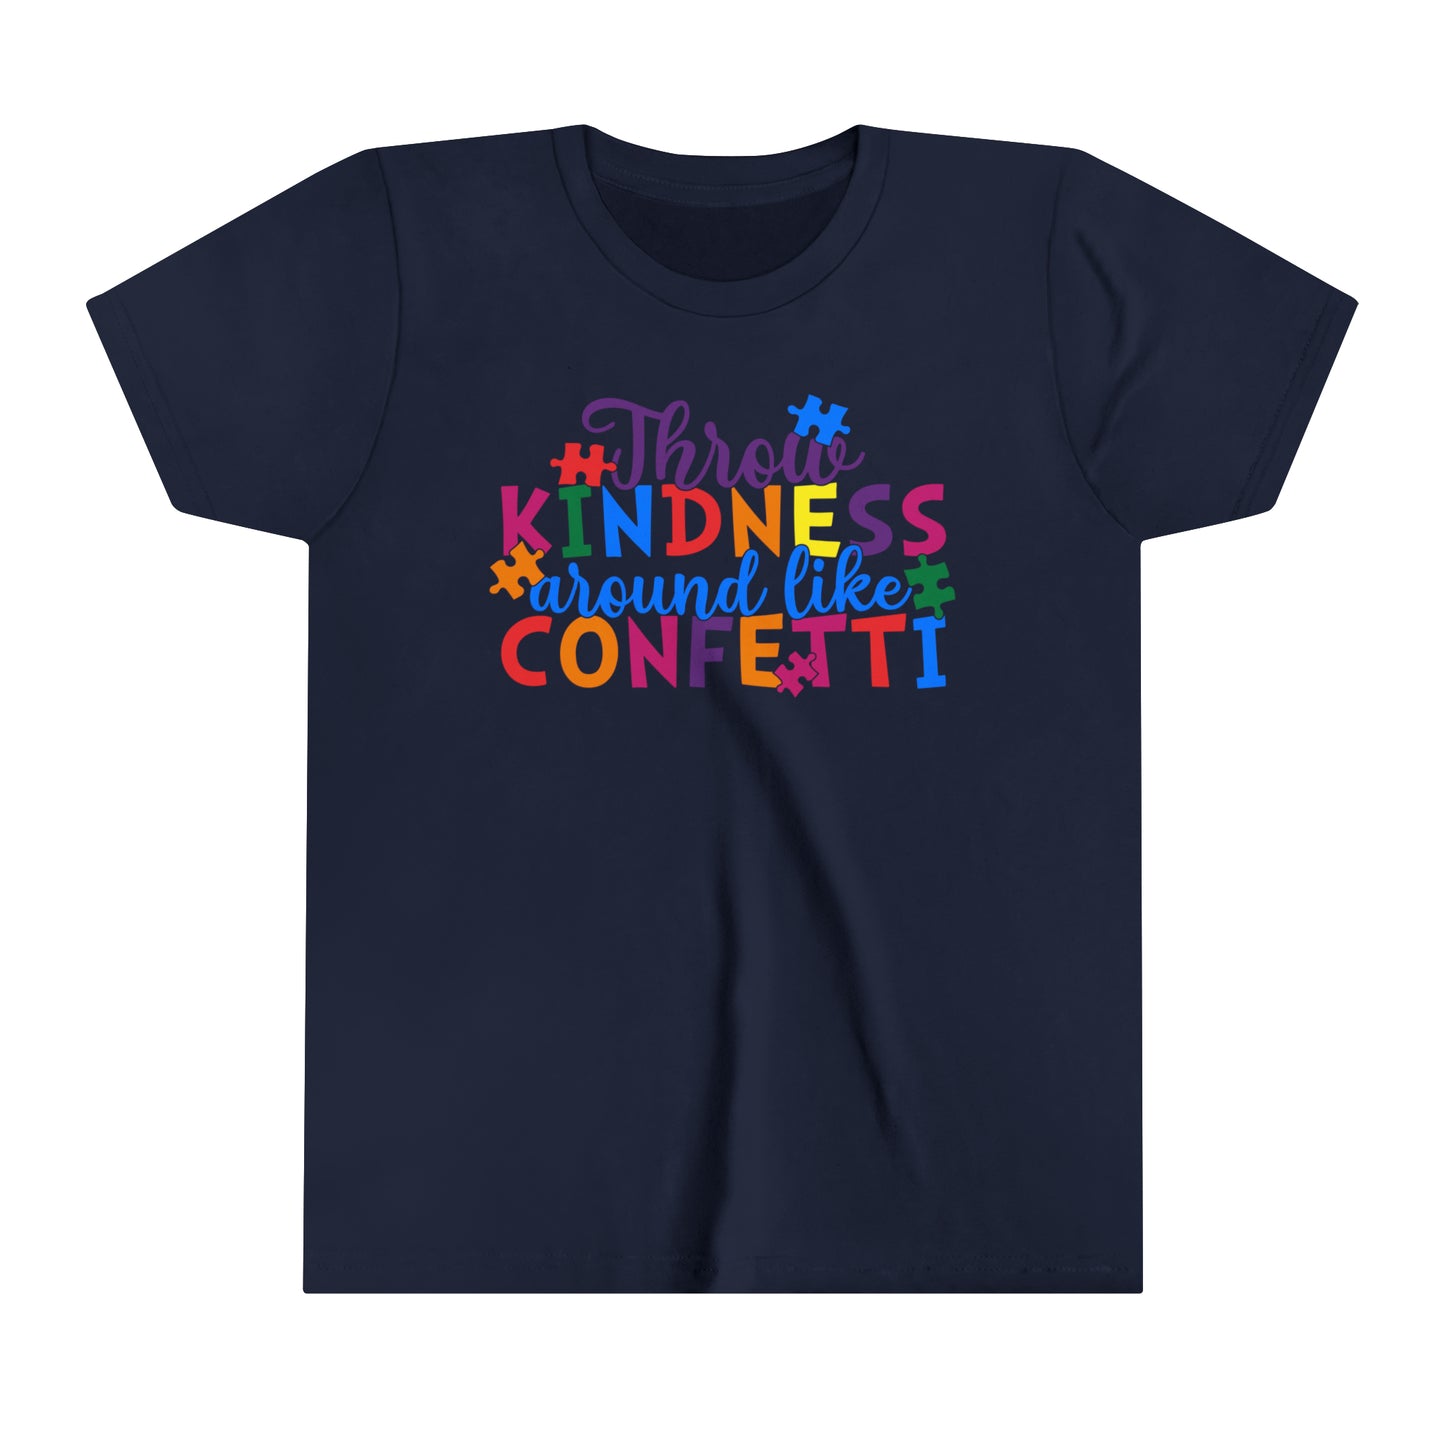 Throw Kindness Autism Advocate Youth Shirt